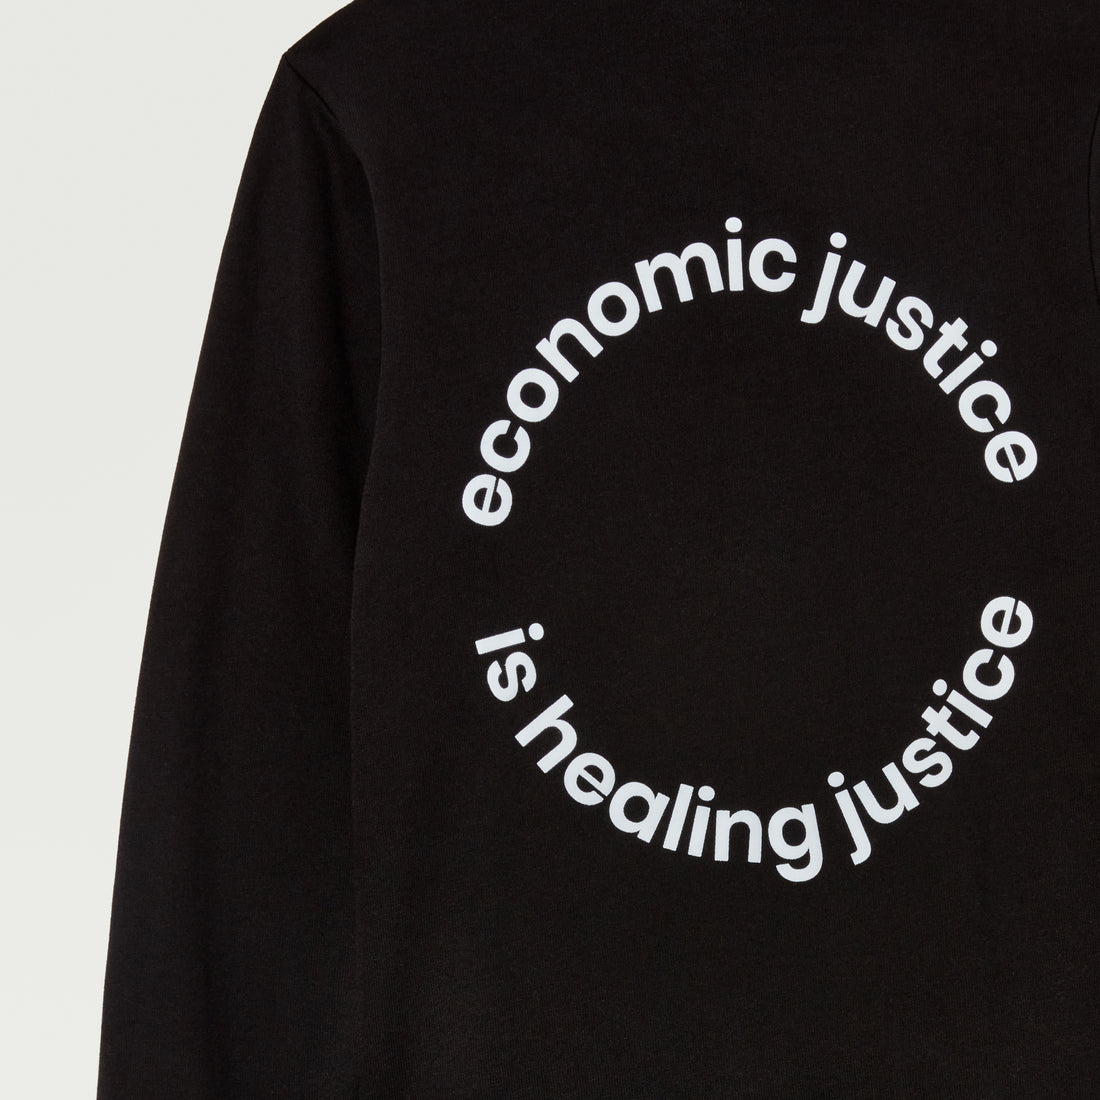 Economic Justice Is Healing Justice Sweatshirt by Gifted